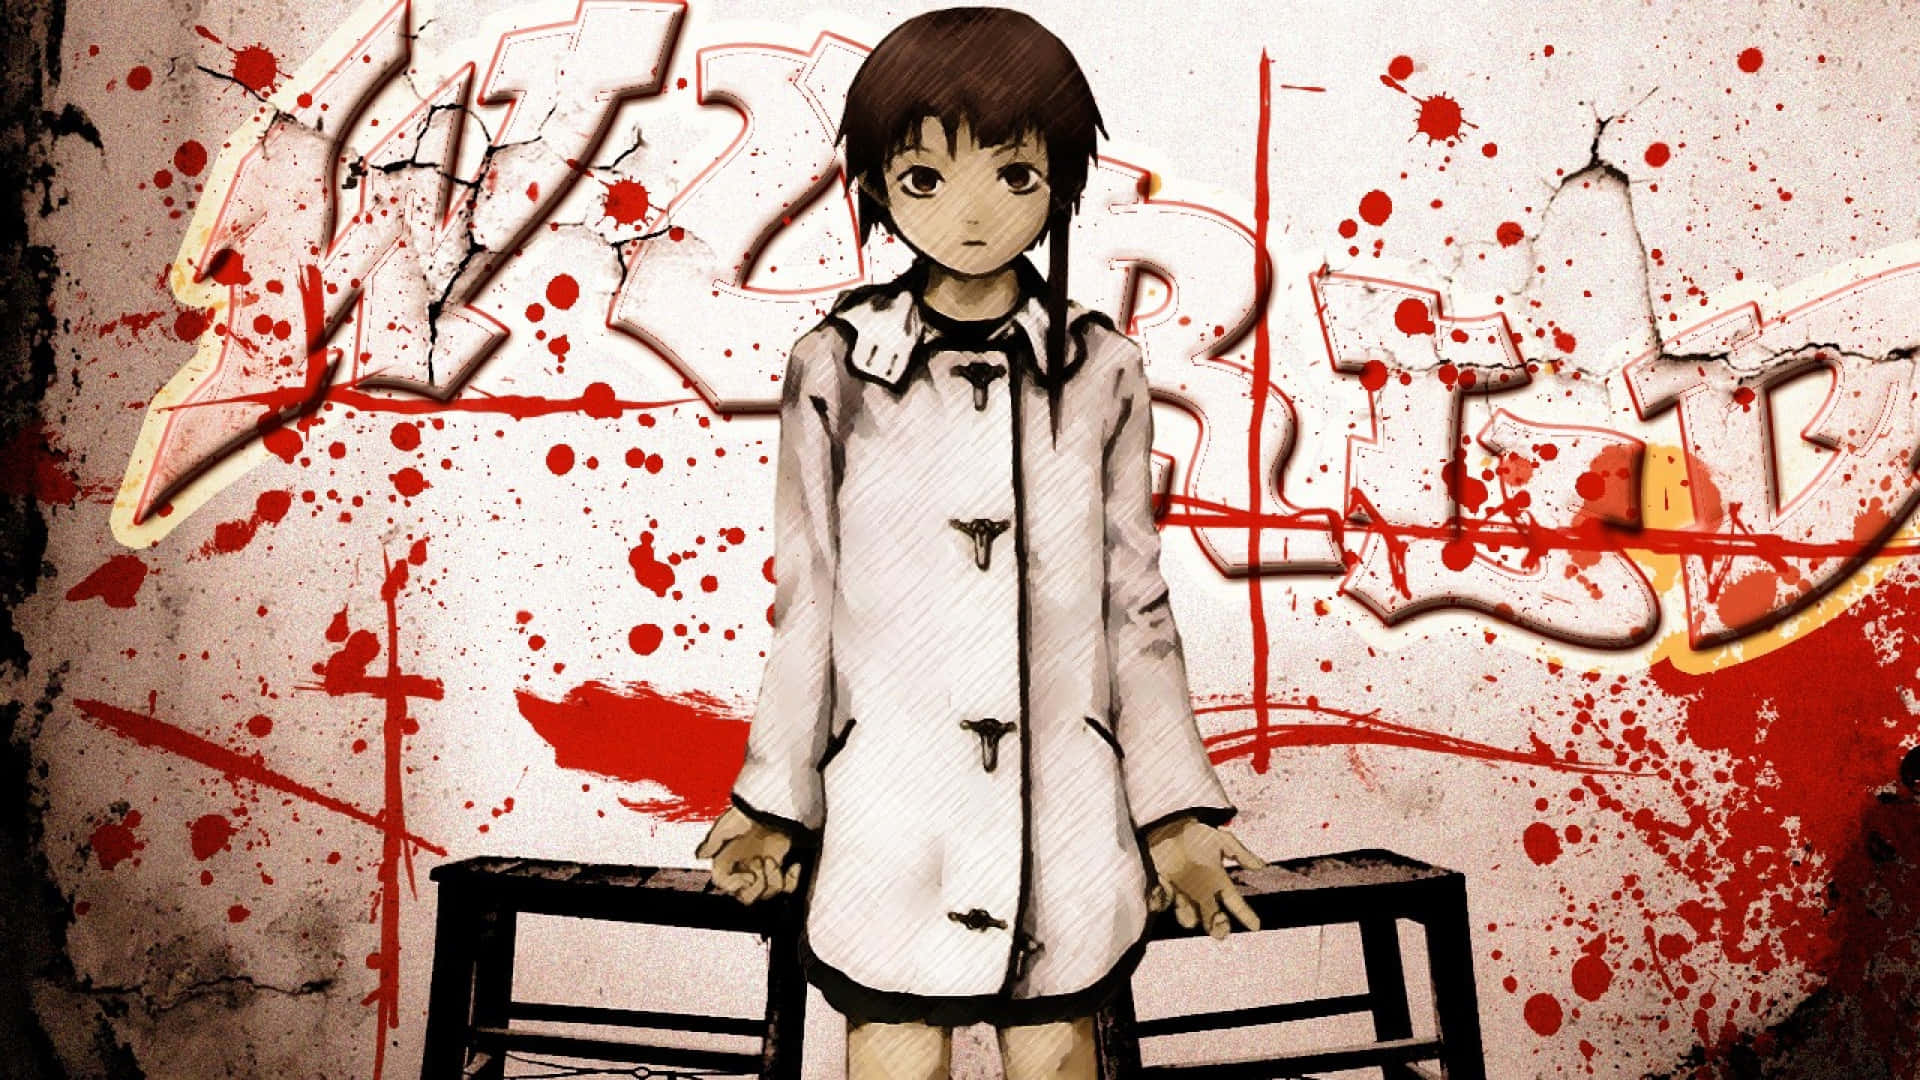 Serial Experiments Lain, A Masterpiece Of Surreal Anime Background